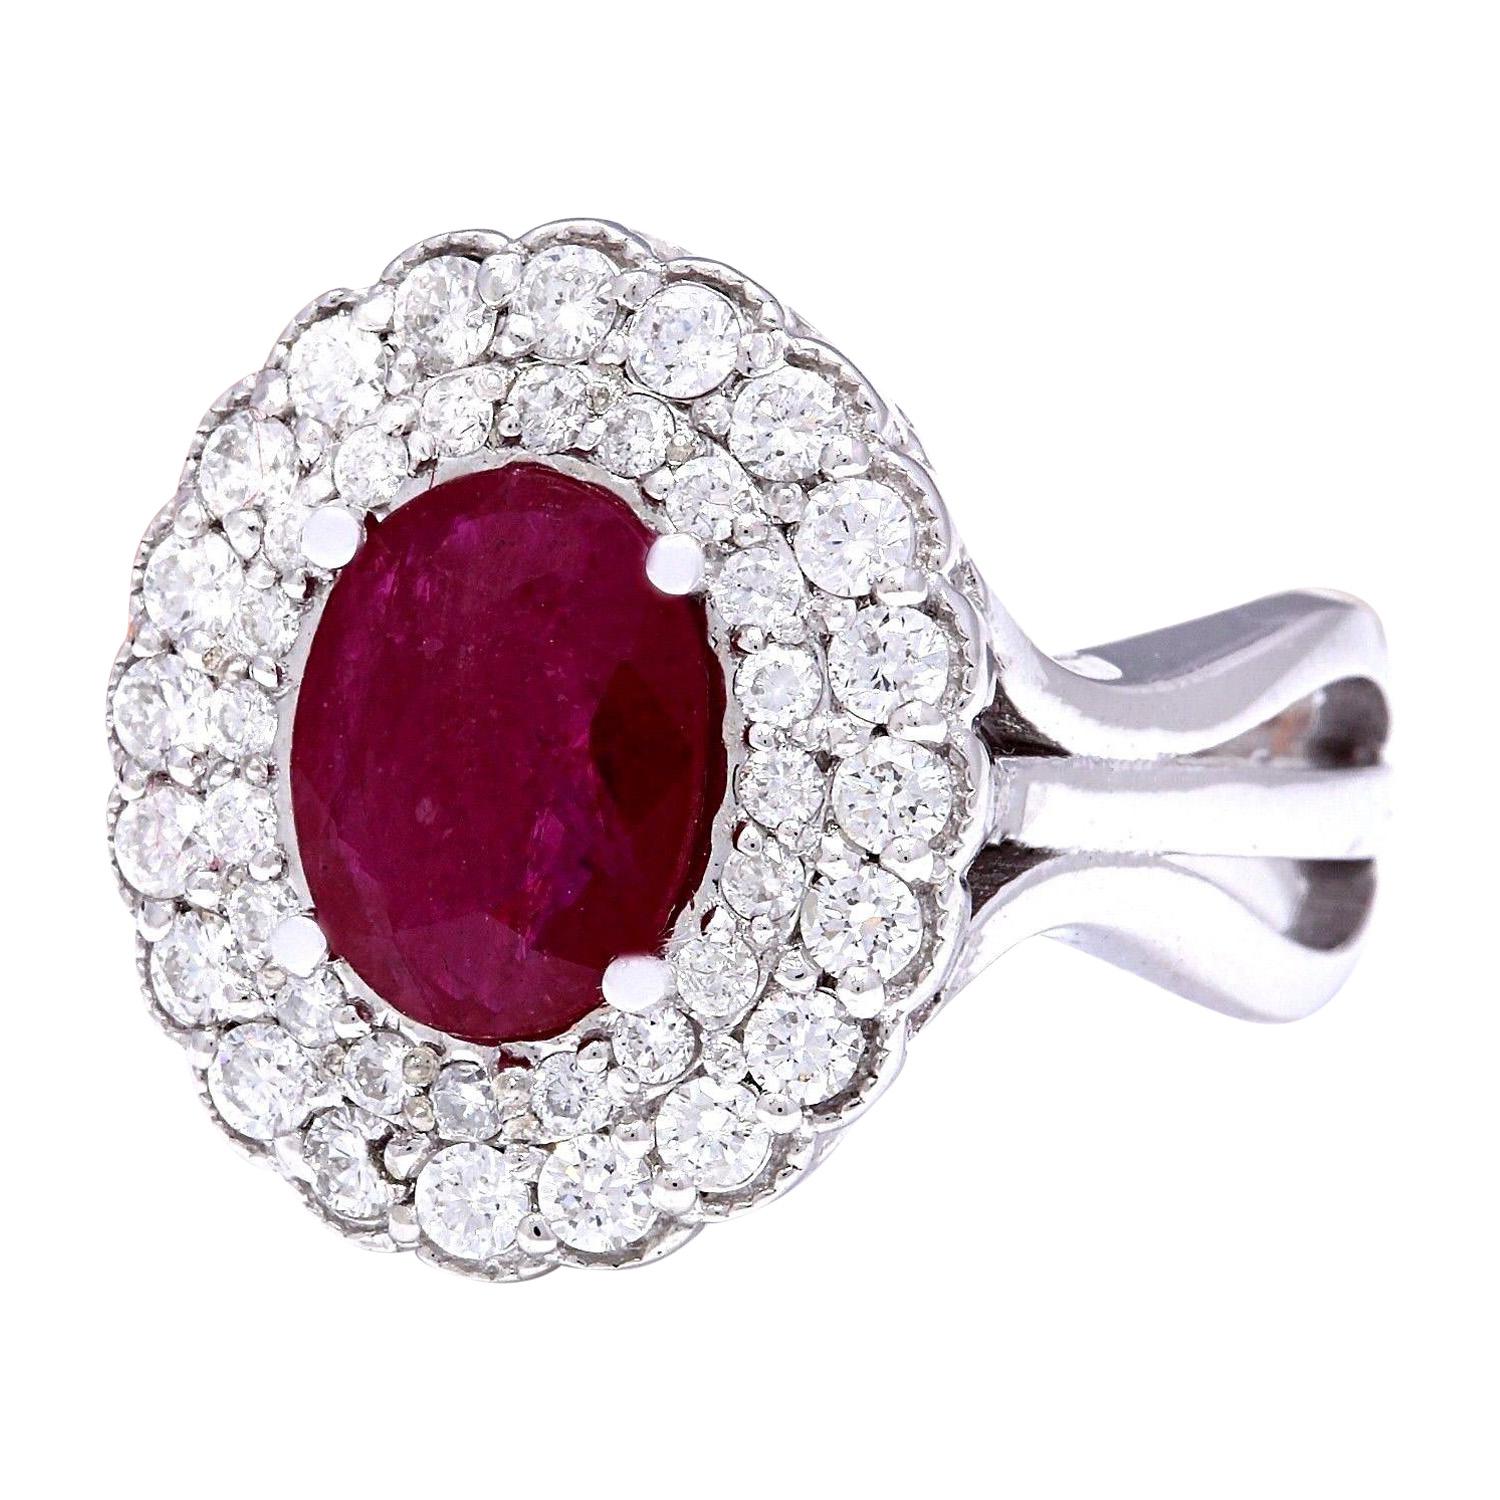 2.60 Carat Natural Ruby 14K Solid White Gold Diamond Ring
 Item Type: Ring
 Item Style: Engagement
 Material: 14K White Gold
 Mainstone: Ruby
 Stone Color: Red
 Stone Weight: 1.80 Carat
 Stone Shape: Oval
 Stone Quantity: 1
 Stone Dimensions: